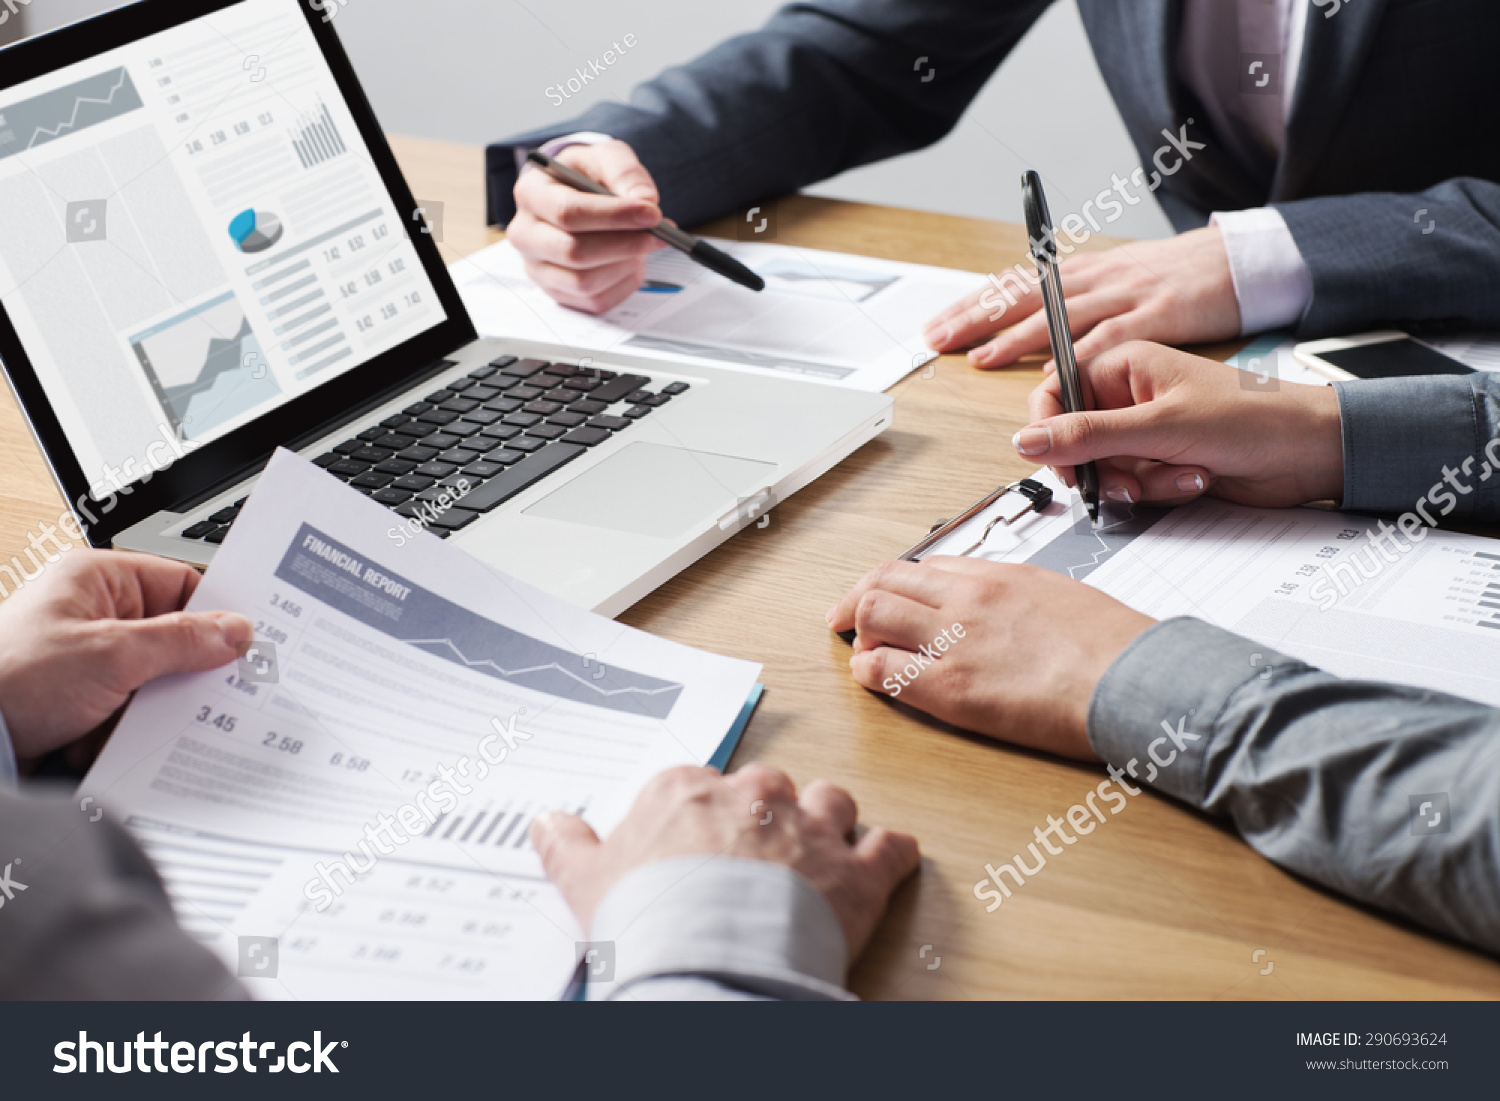 Business professionals working together at office desk, hands close up pointing out financial data on a report, teamwork concept #290693624